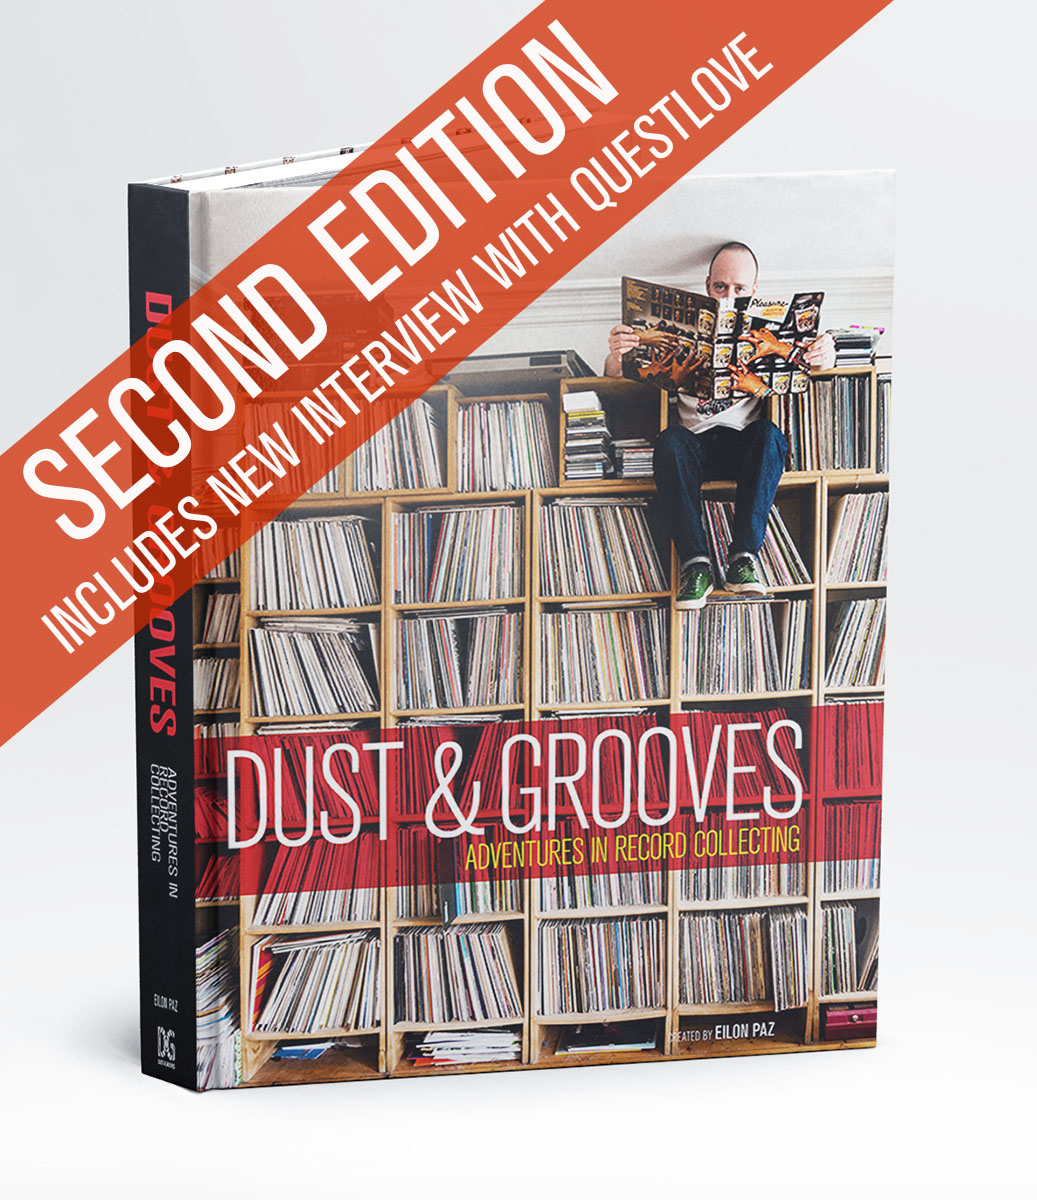 Dust & Grooves: Adventures in Record Collecting. [Limited Second Edition]